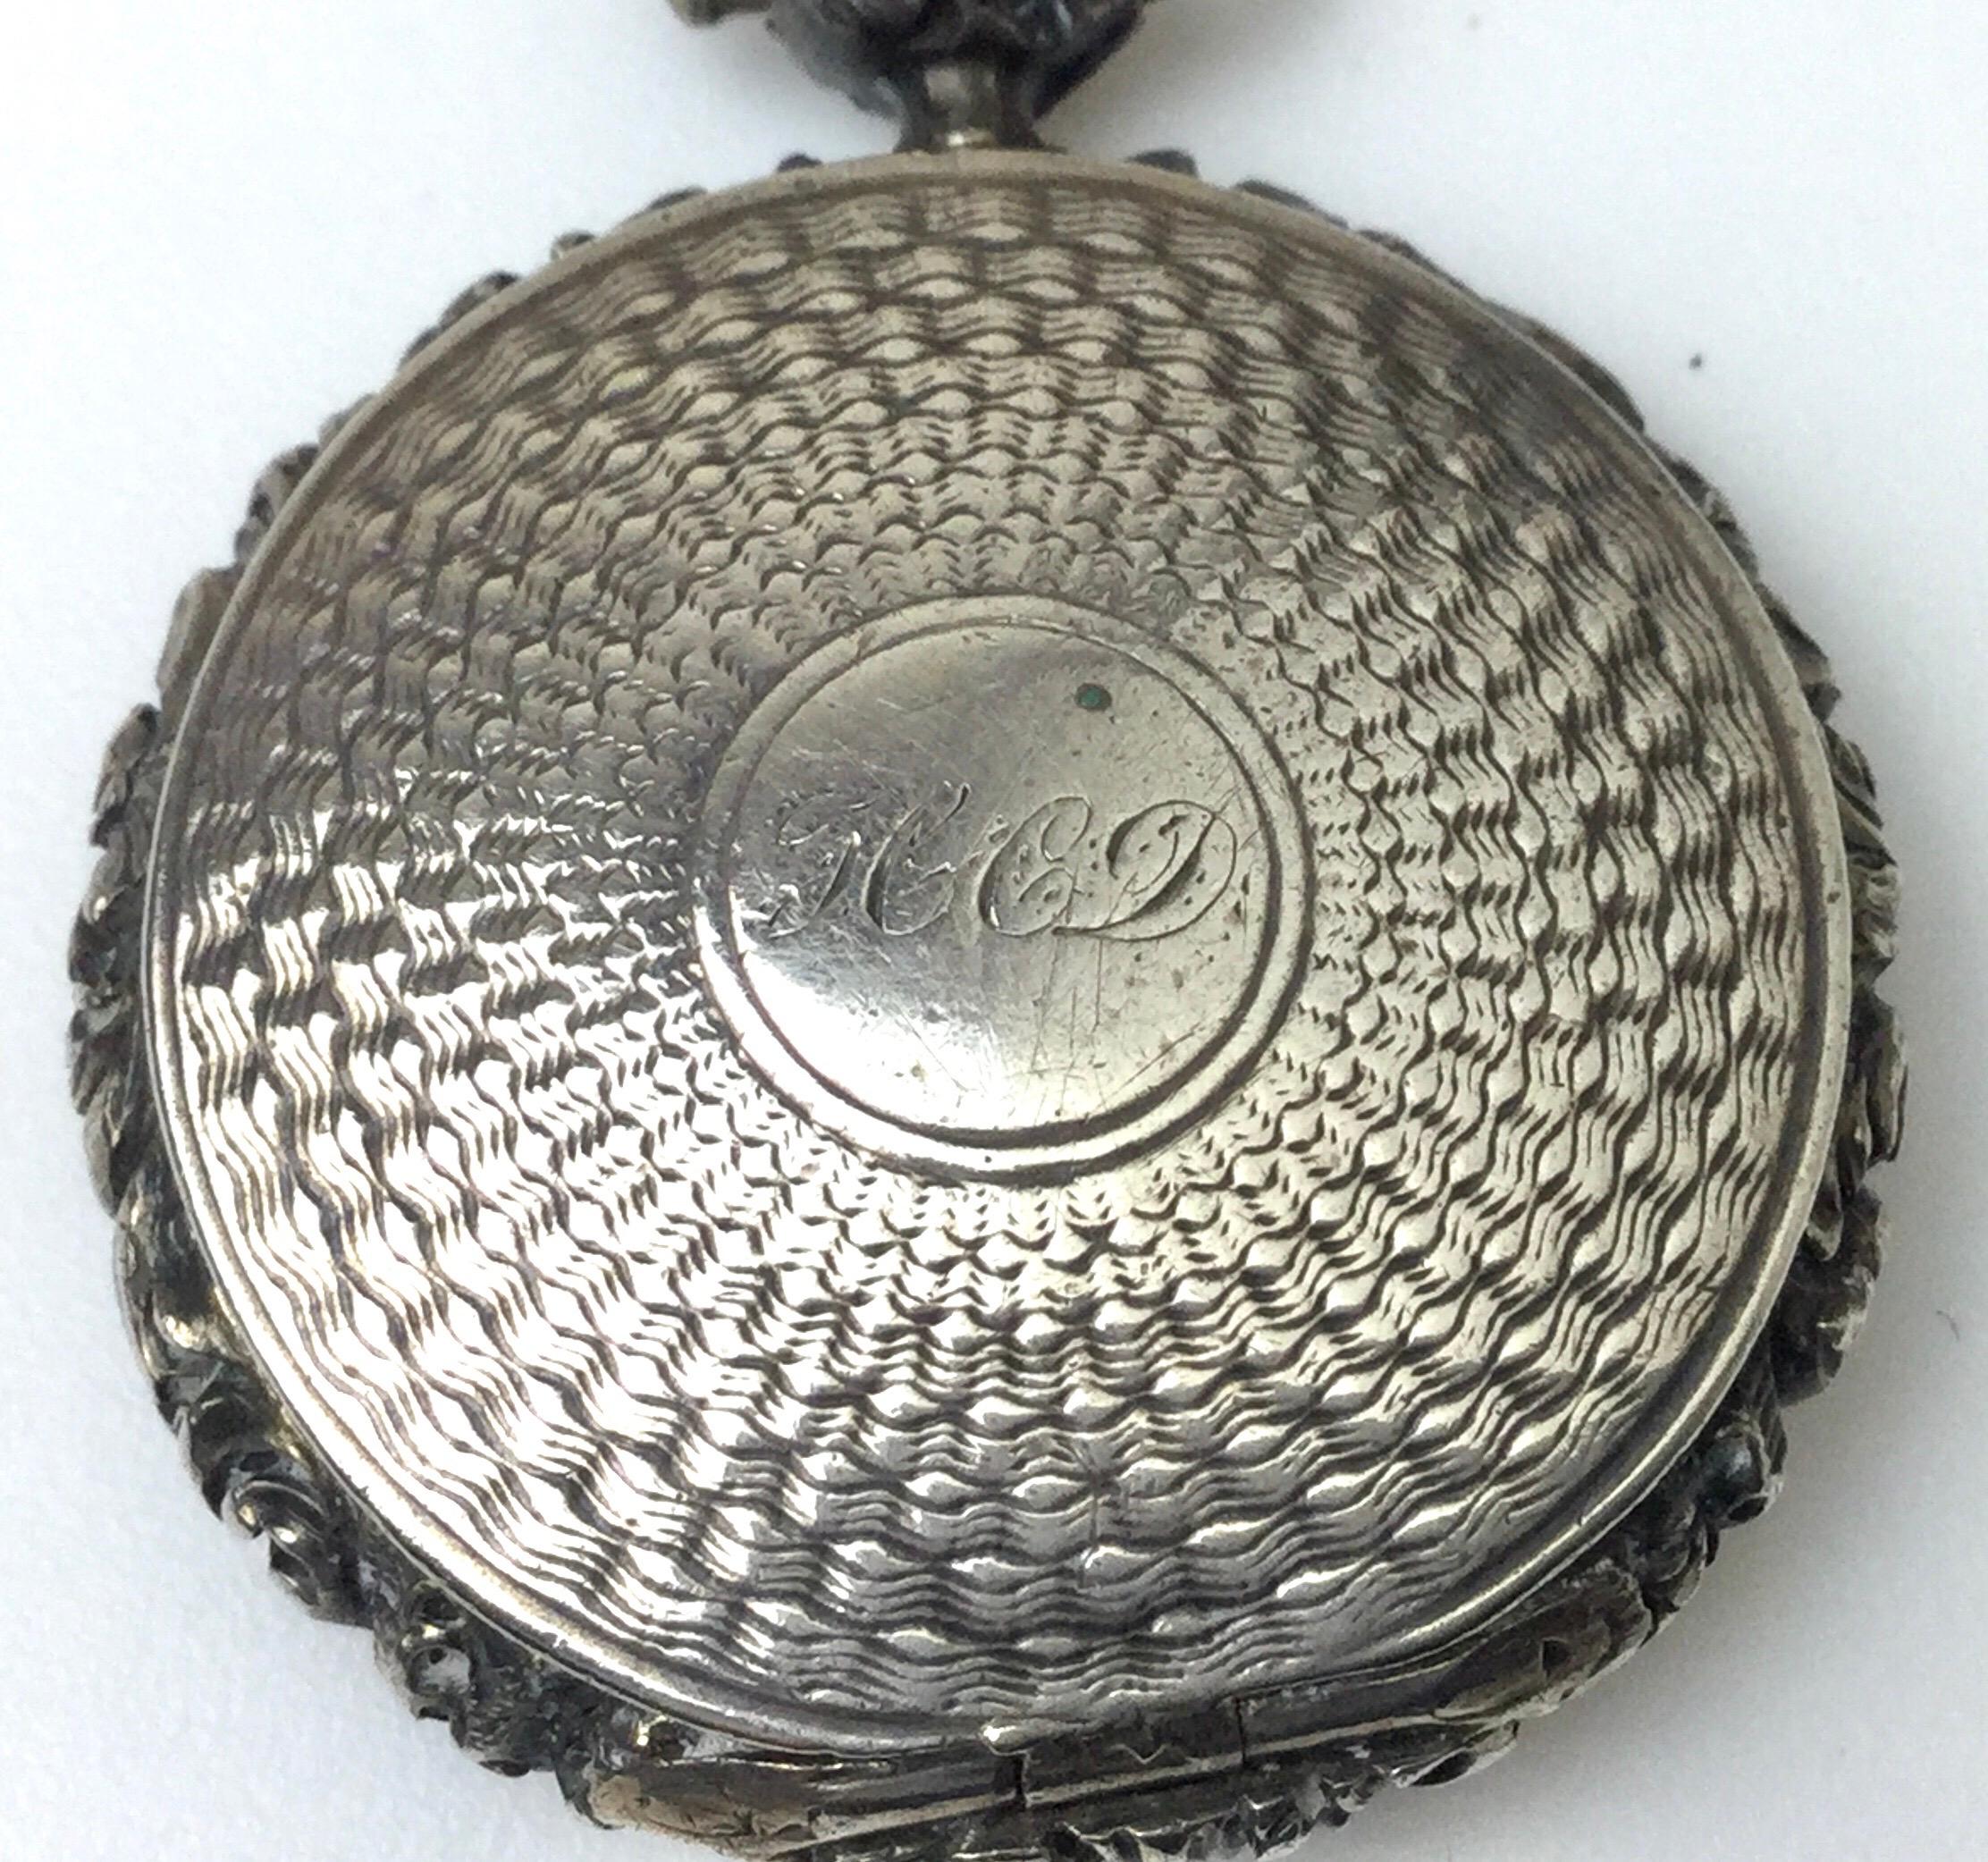 This is a rare form English sterling Birmingham 1832-1833 by Jos. Willmore. HCD is the monogram. Gold wash on the inside. Measures: 1” by 1 1/2” tall with ring. The English hallmarks located on the inside. Age appropriate ware. No dings or dents.